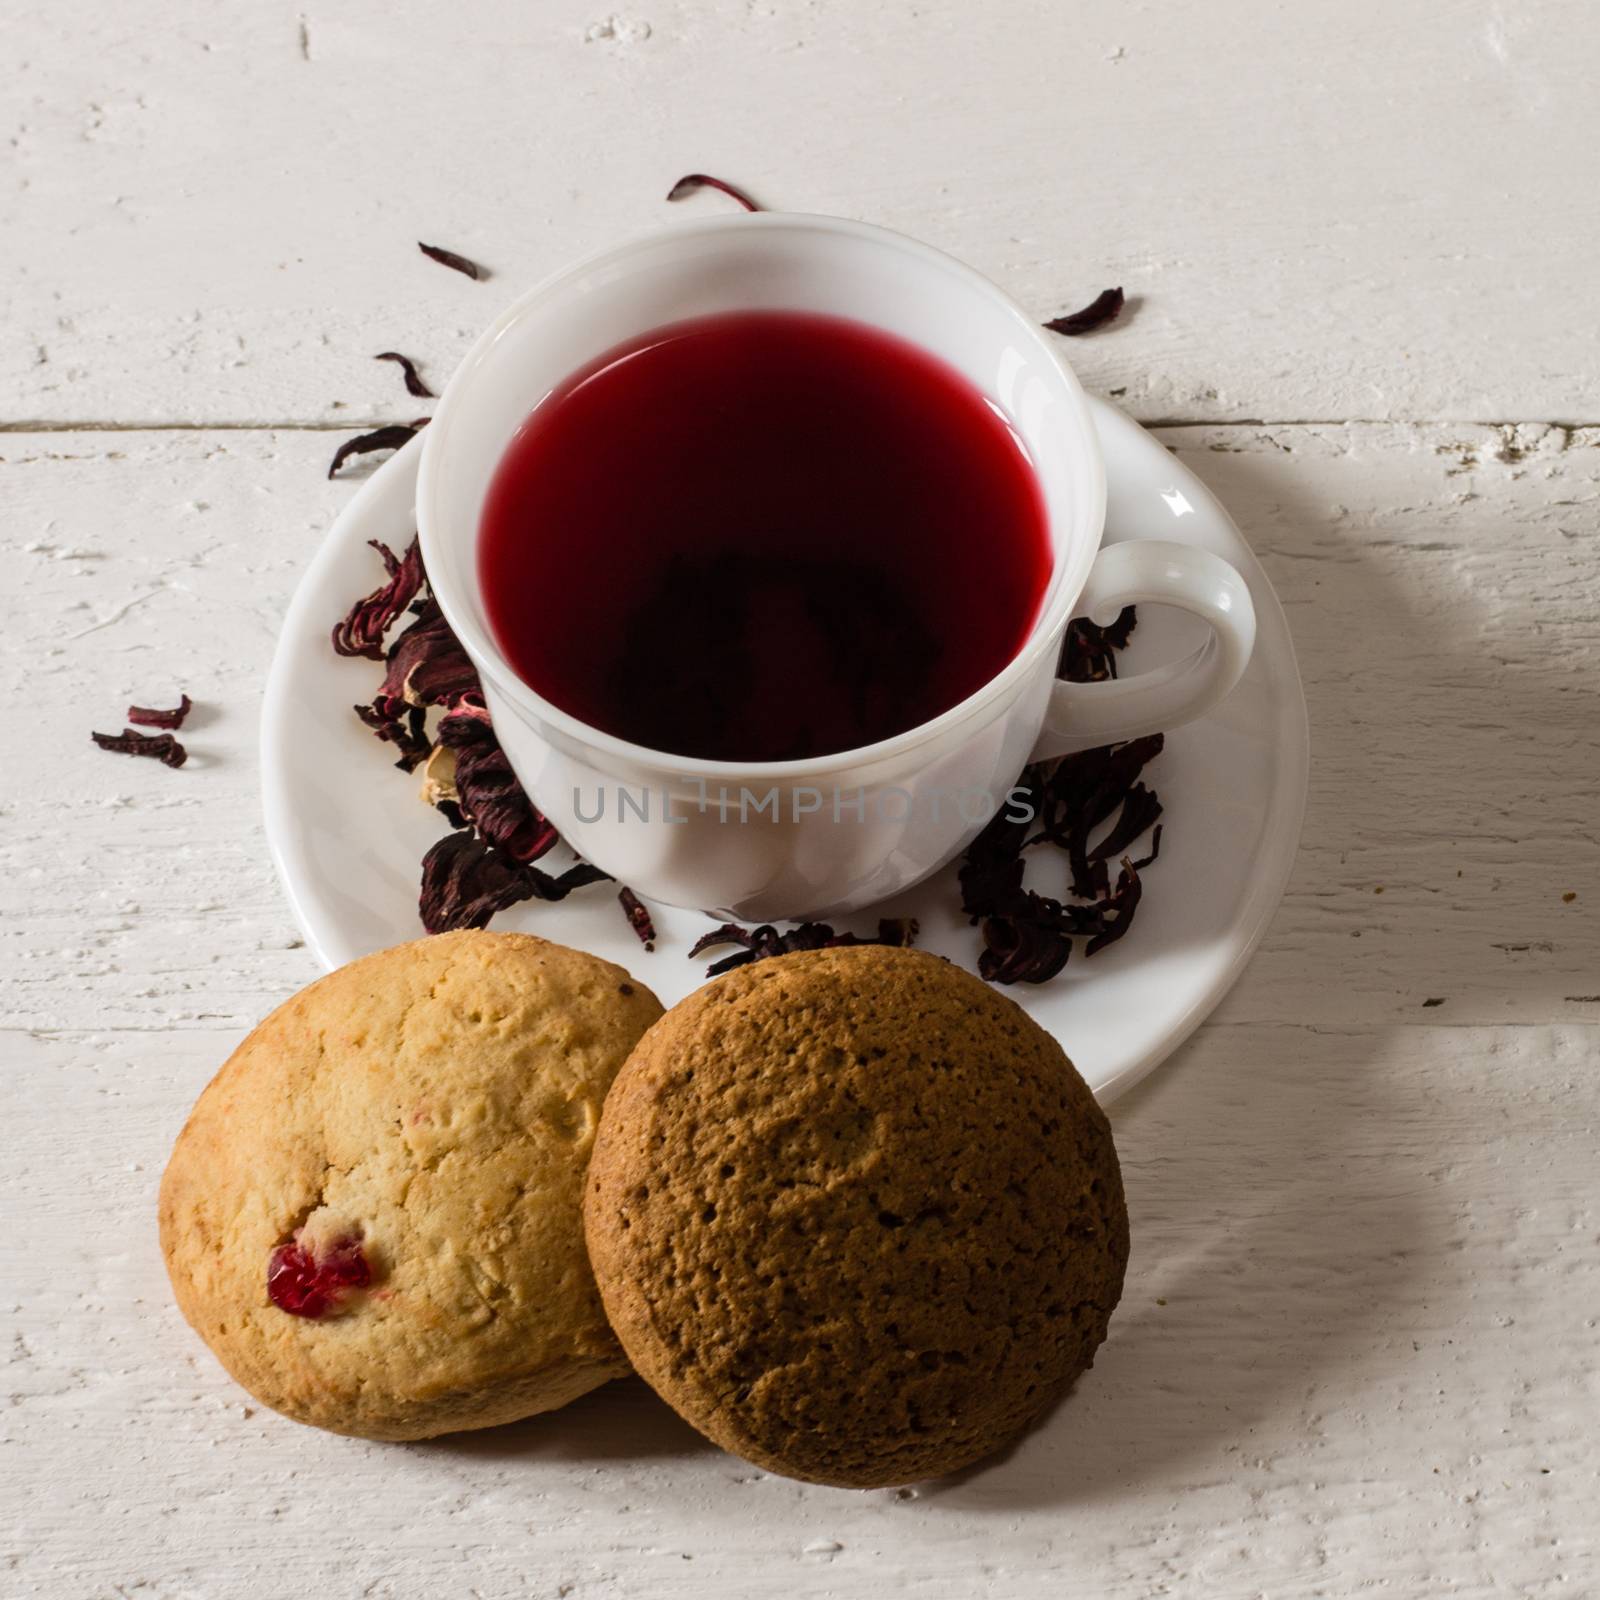 Cup of Karkadeh Red Tea with Dry Flowers and cookies on wooden table